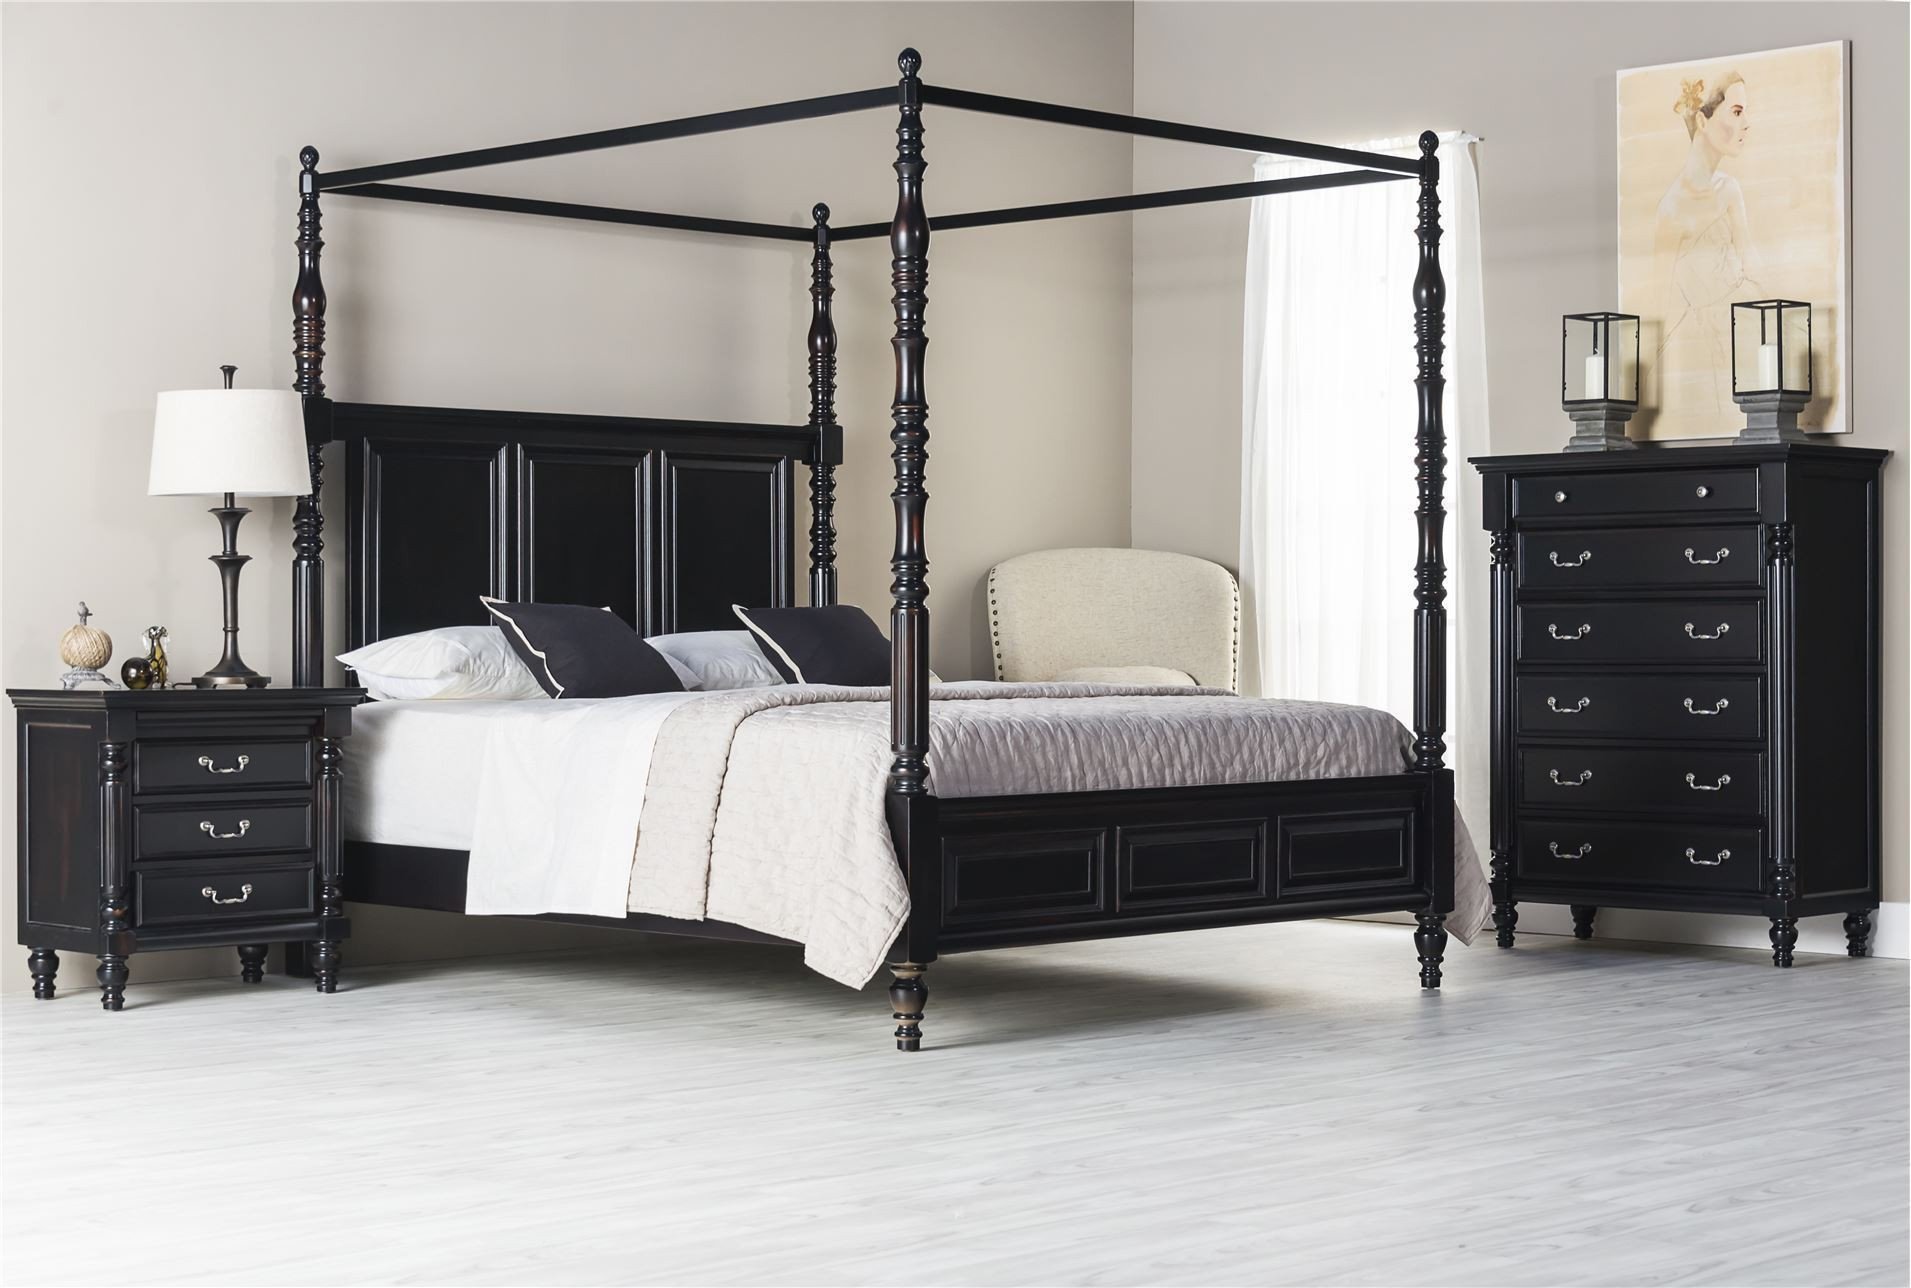 California King Canopy Bedroom Set Luxury Image Of Canopy Bed Frame Queen Photo Coaster Ilana King